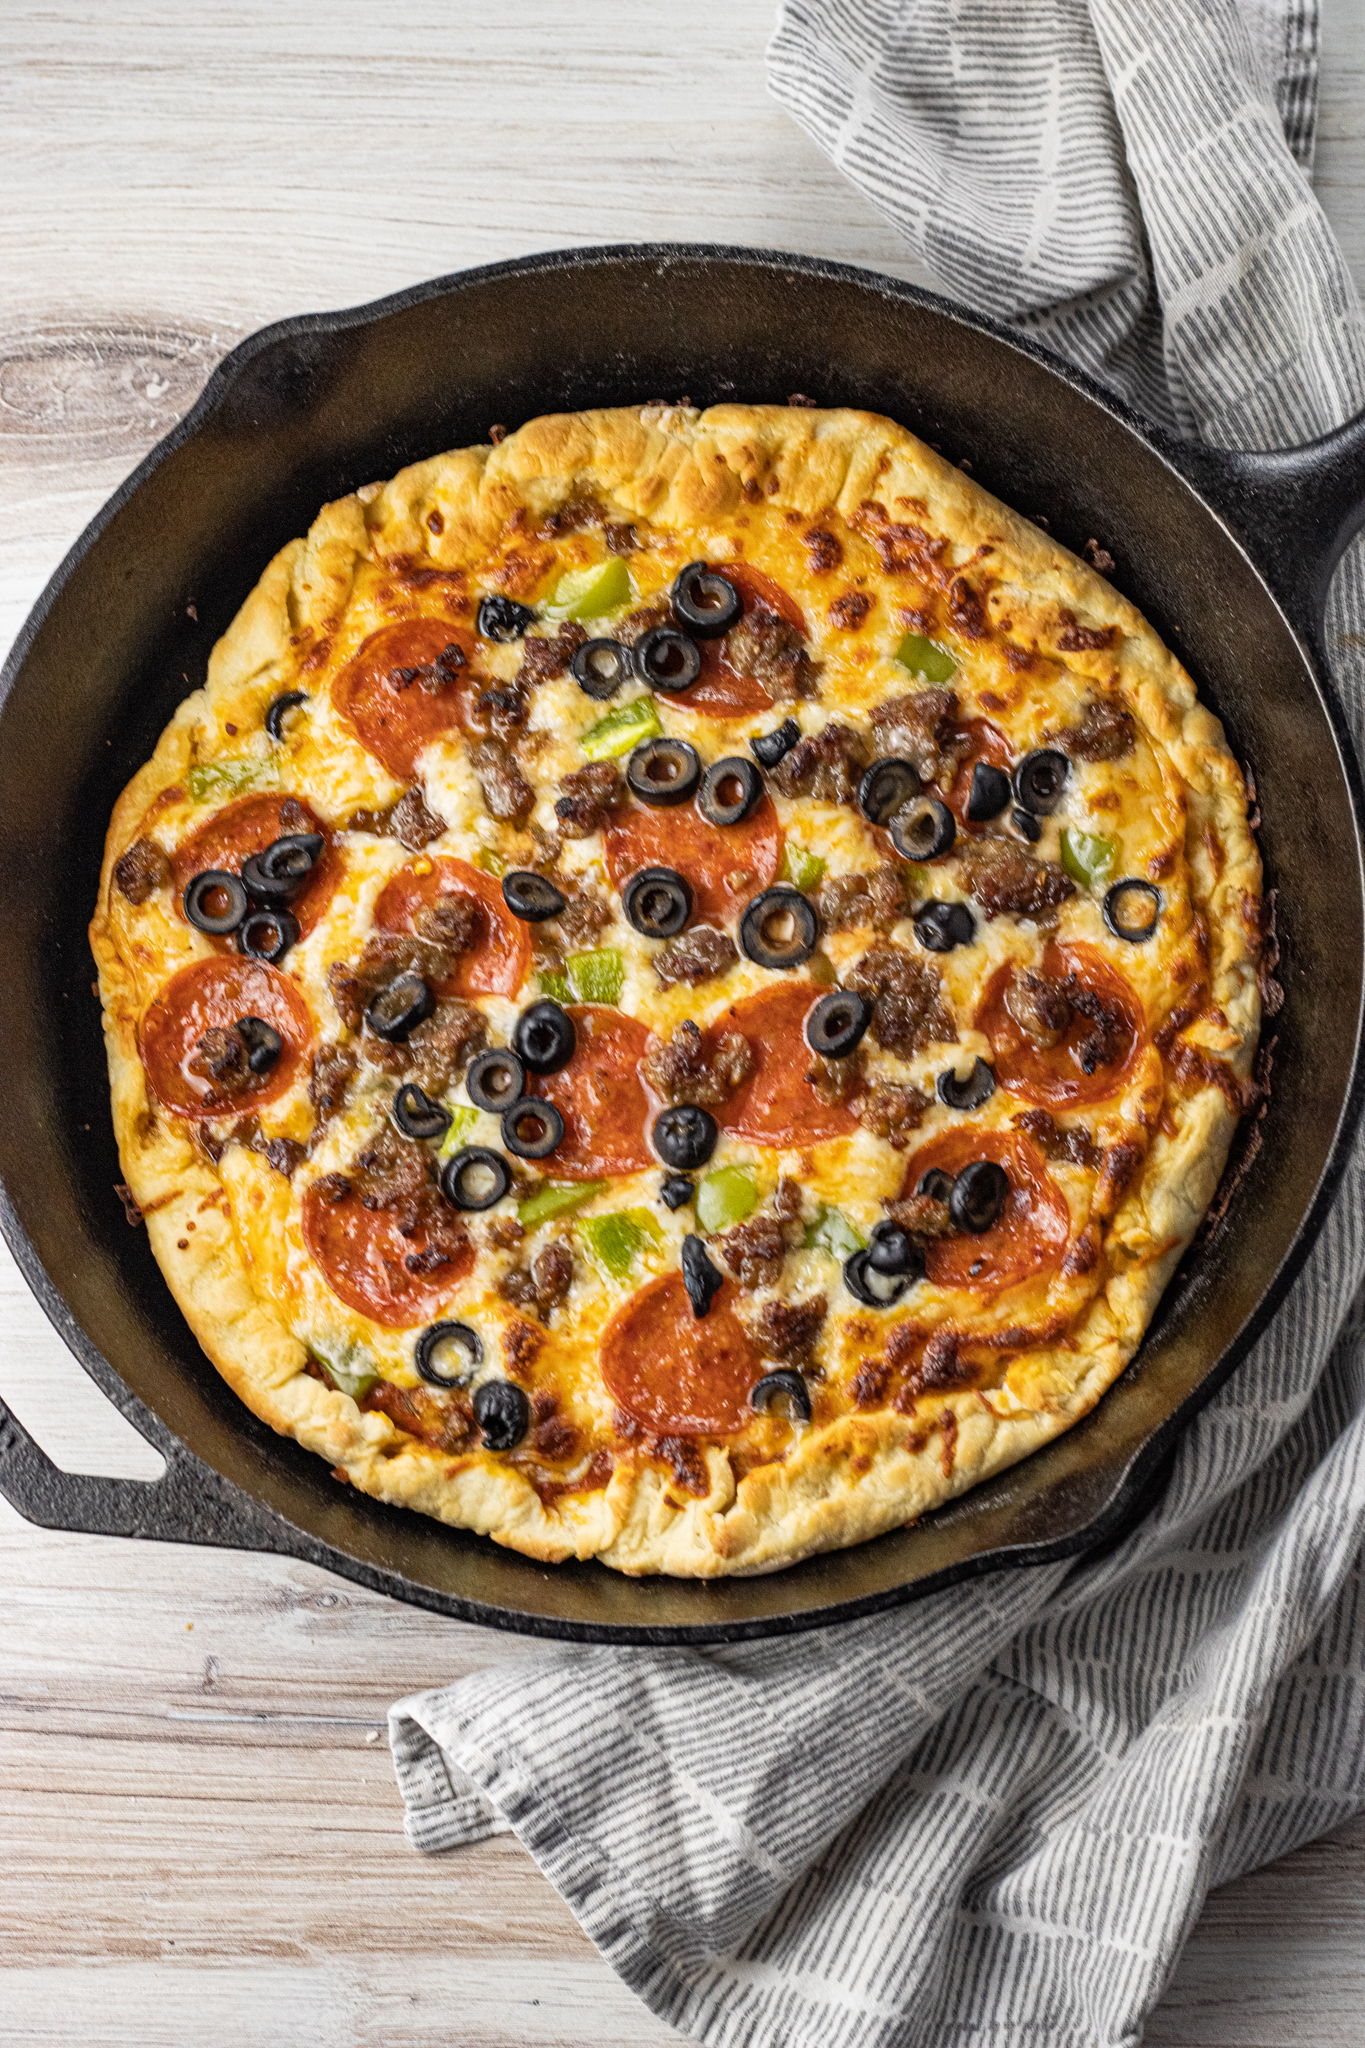 Crispy and Chewy: Try this Cast Iron Skillet Pepperoni Pizza Recipe